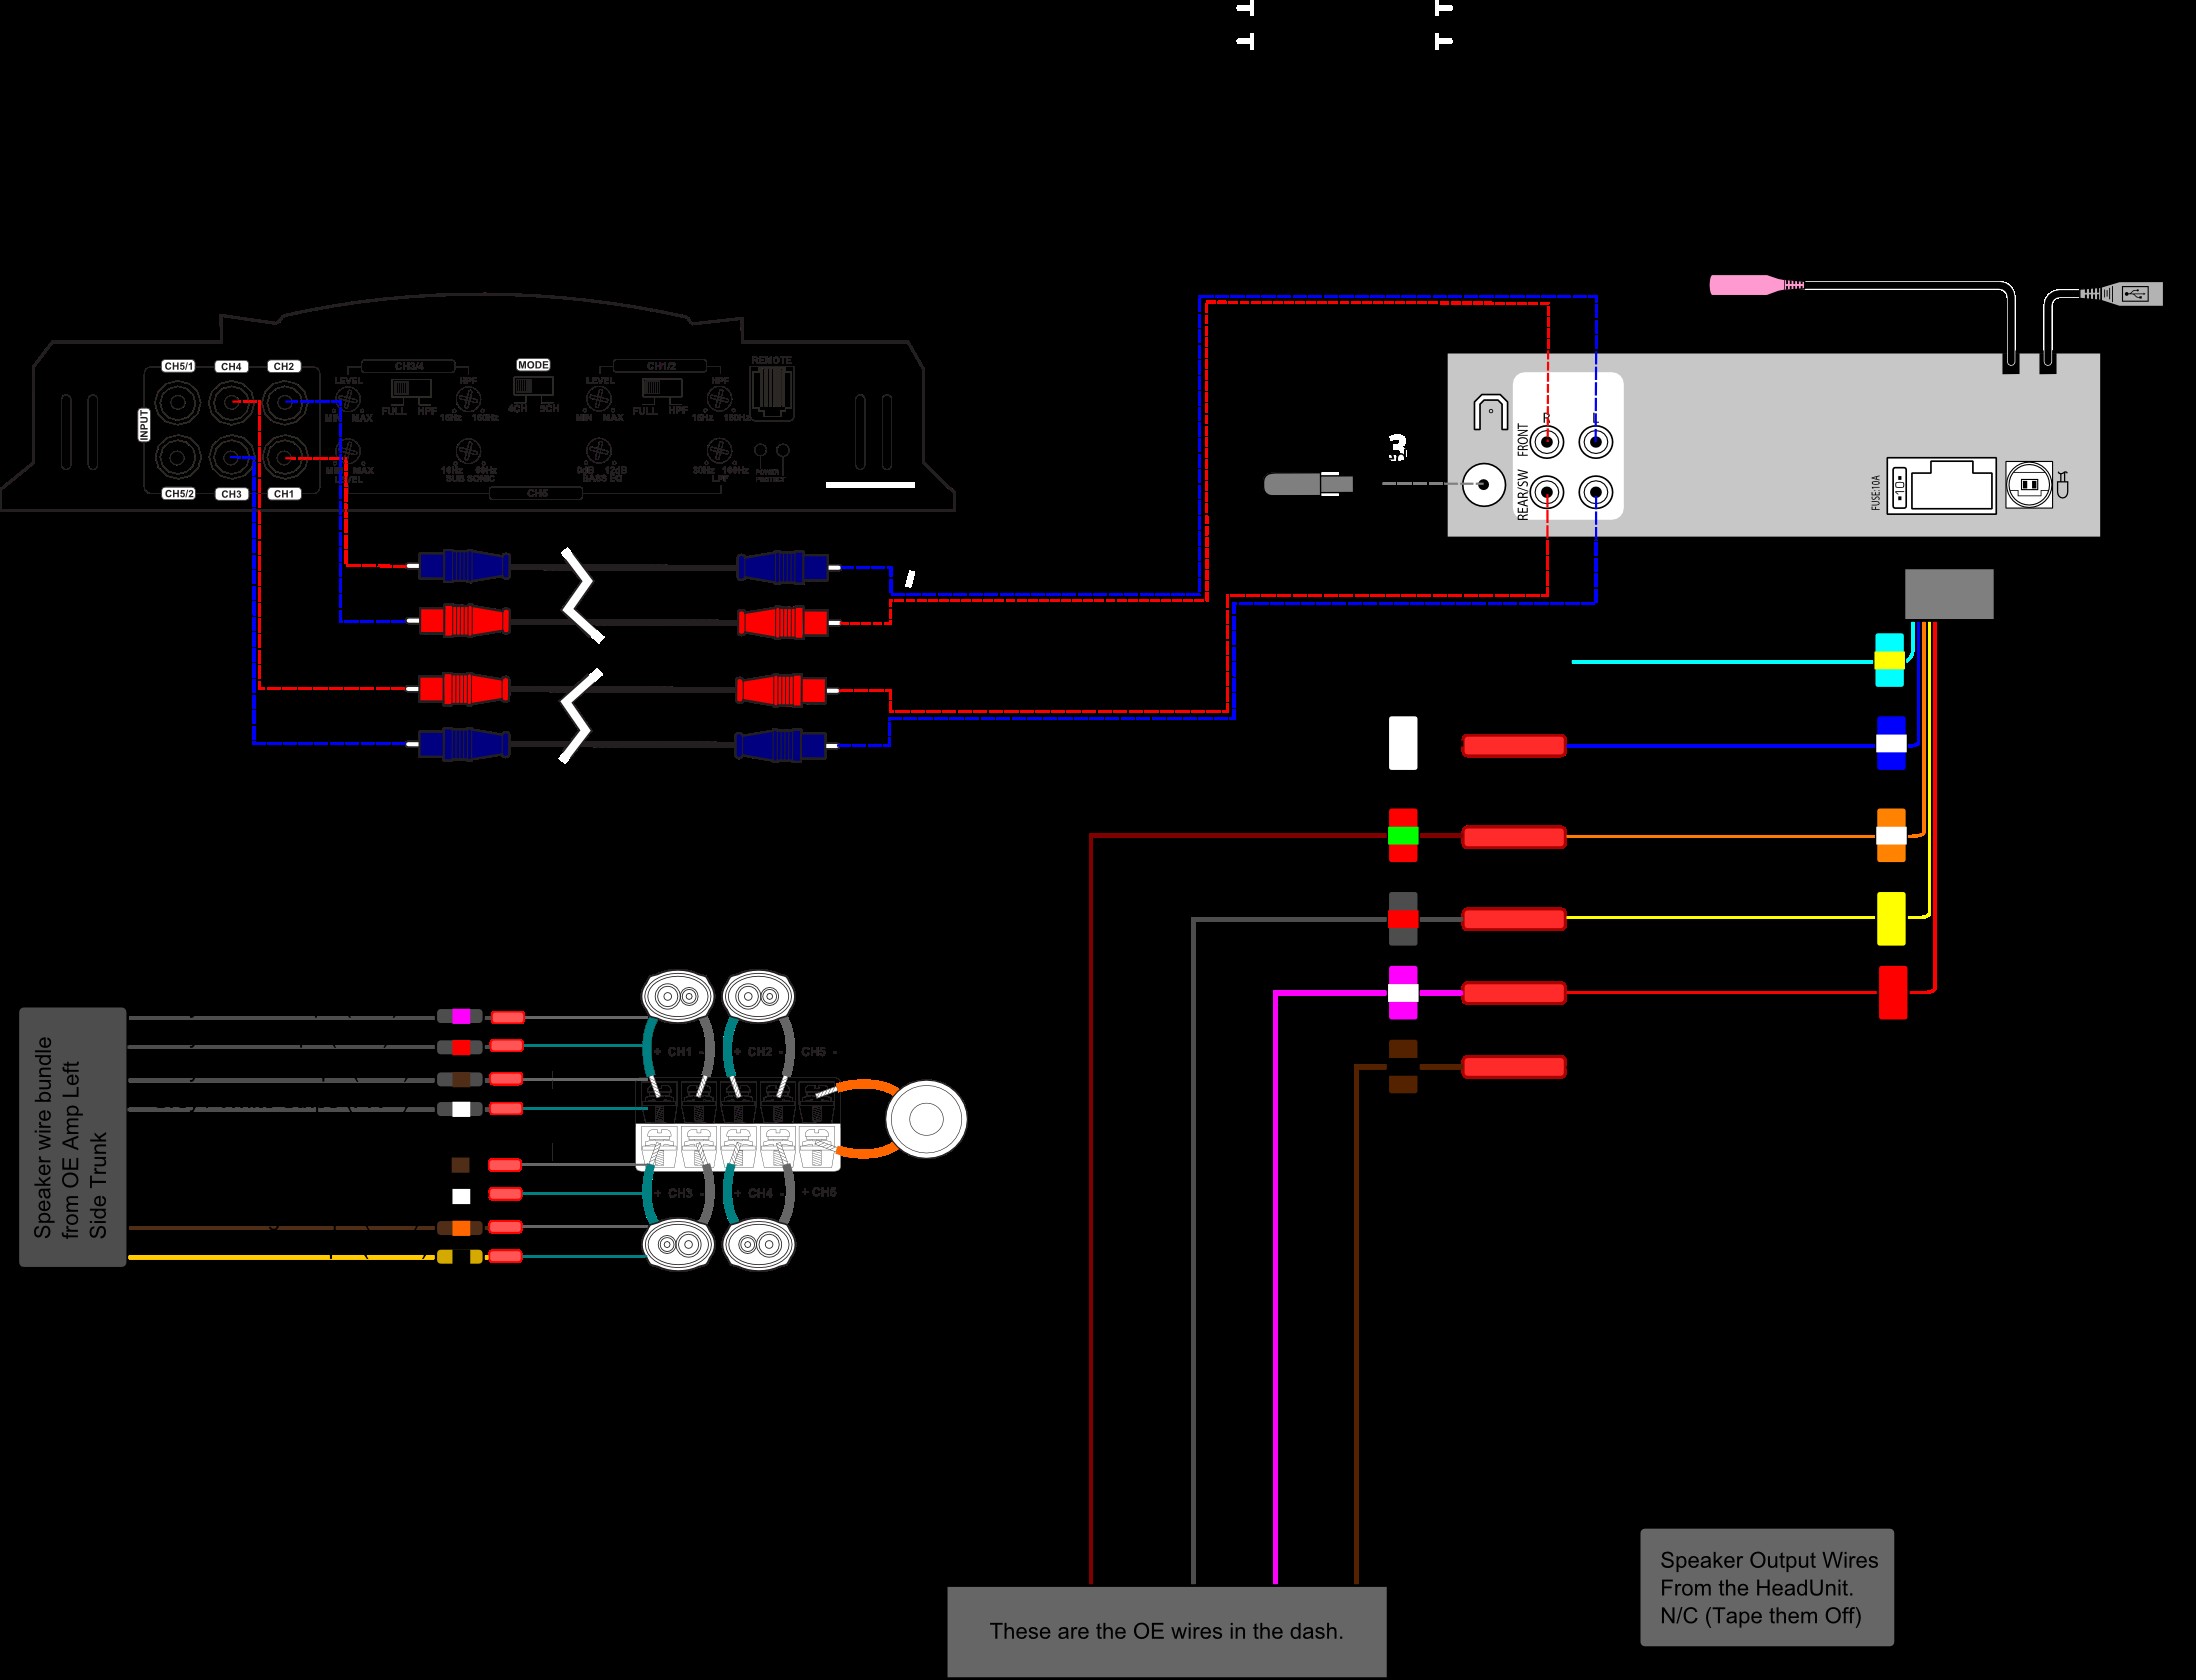 Car Amplifier Connection Diagram Car Audio Wiring Diagrams Jvc Stereo Diagram Color On within Auto